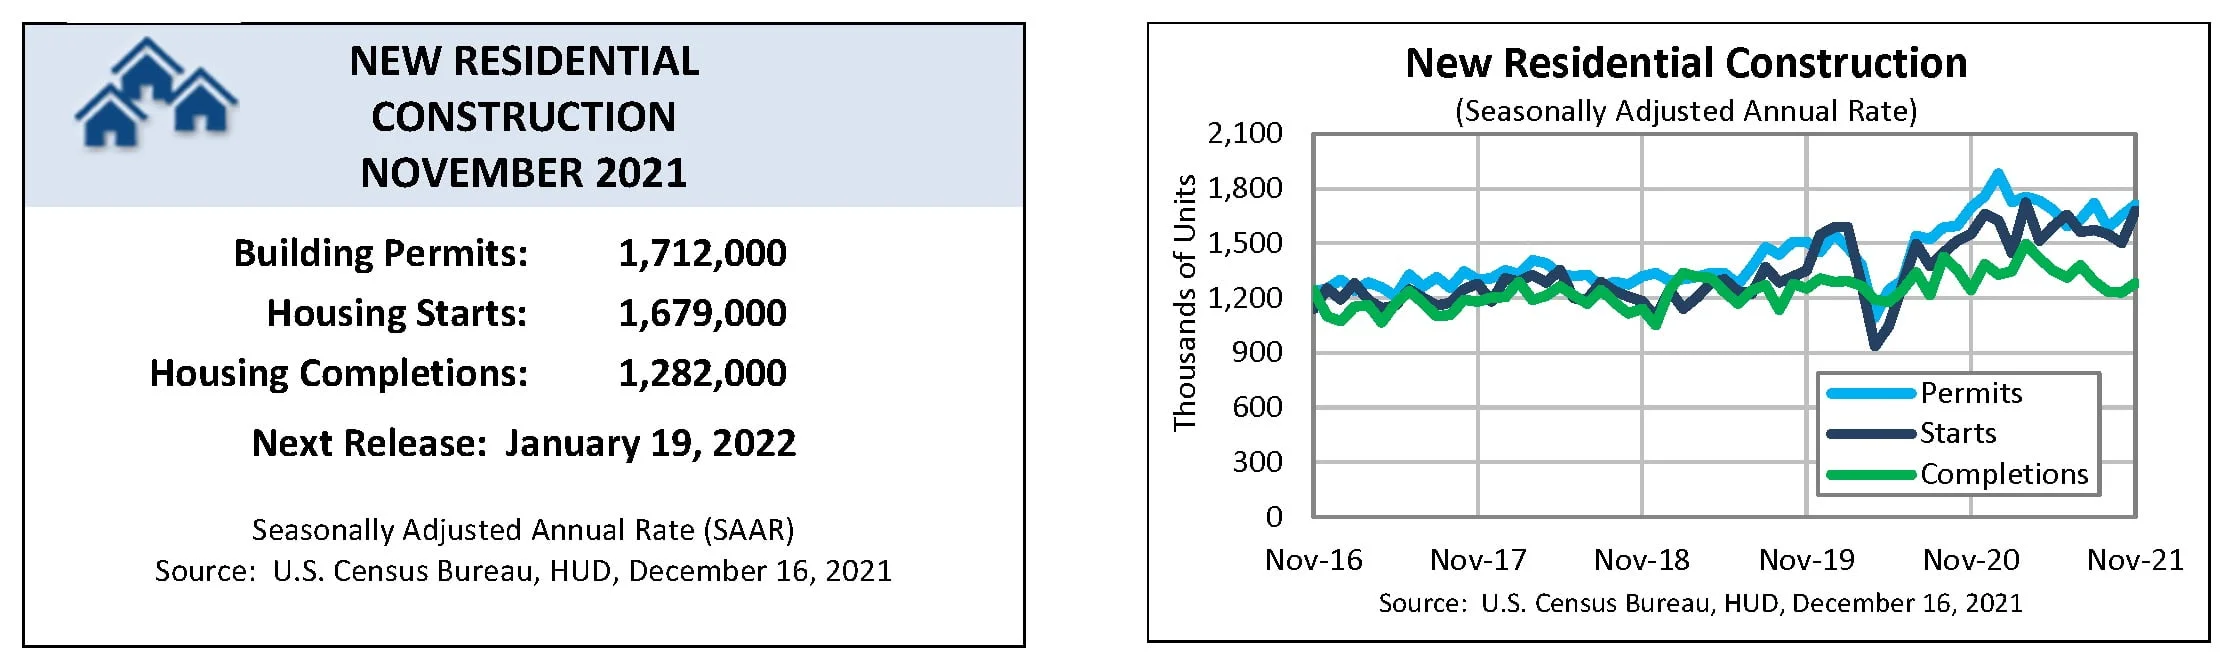 a graph showing new residential construction in november 2021